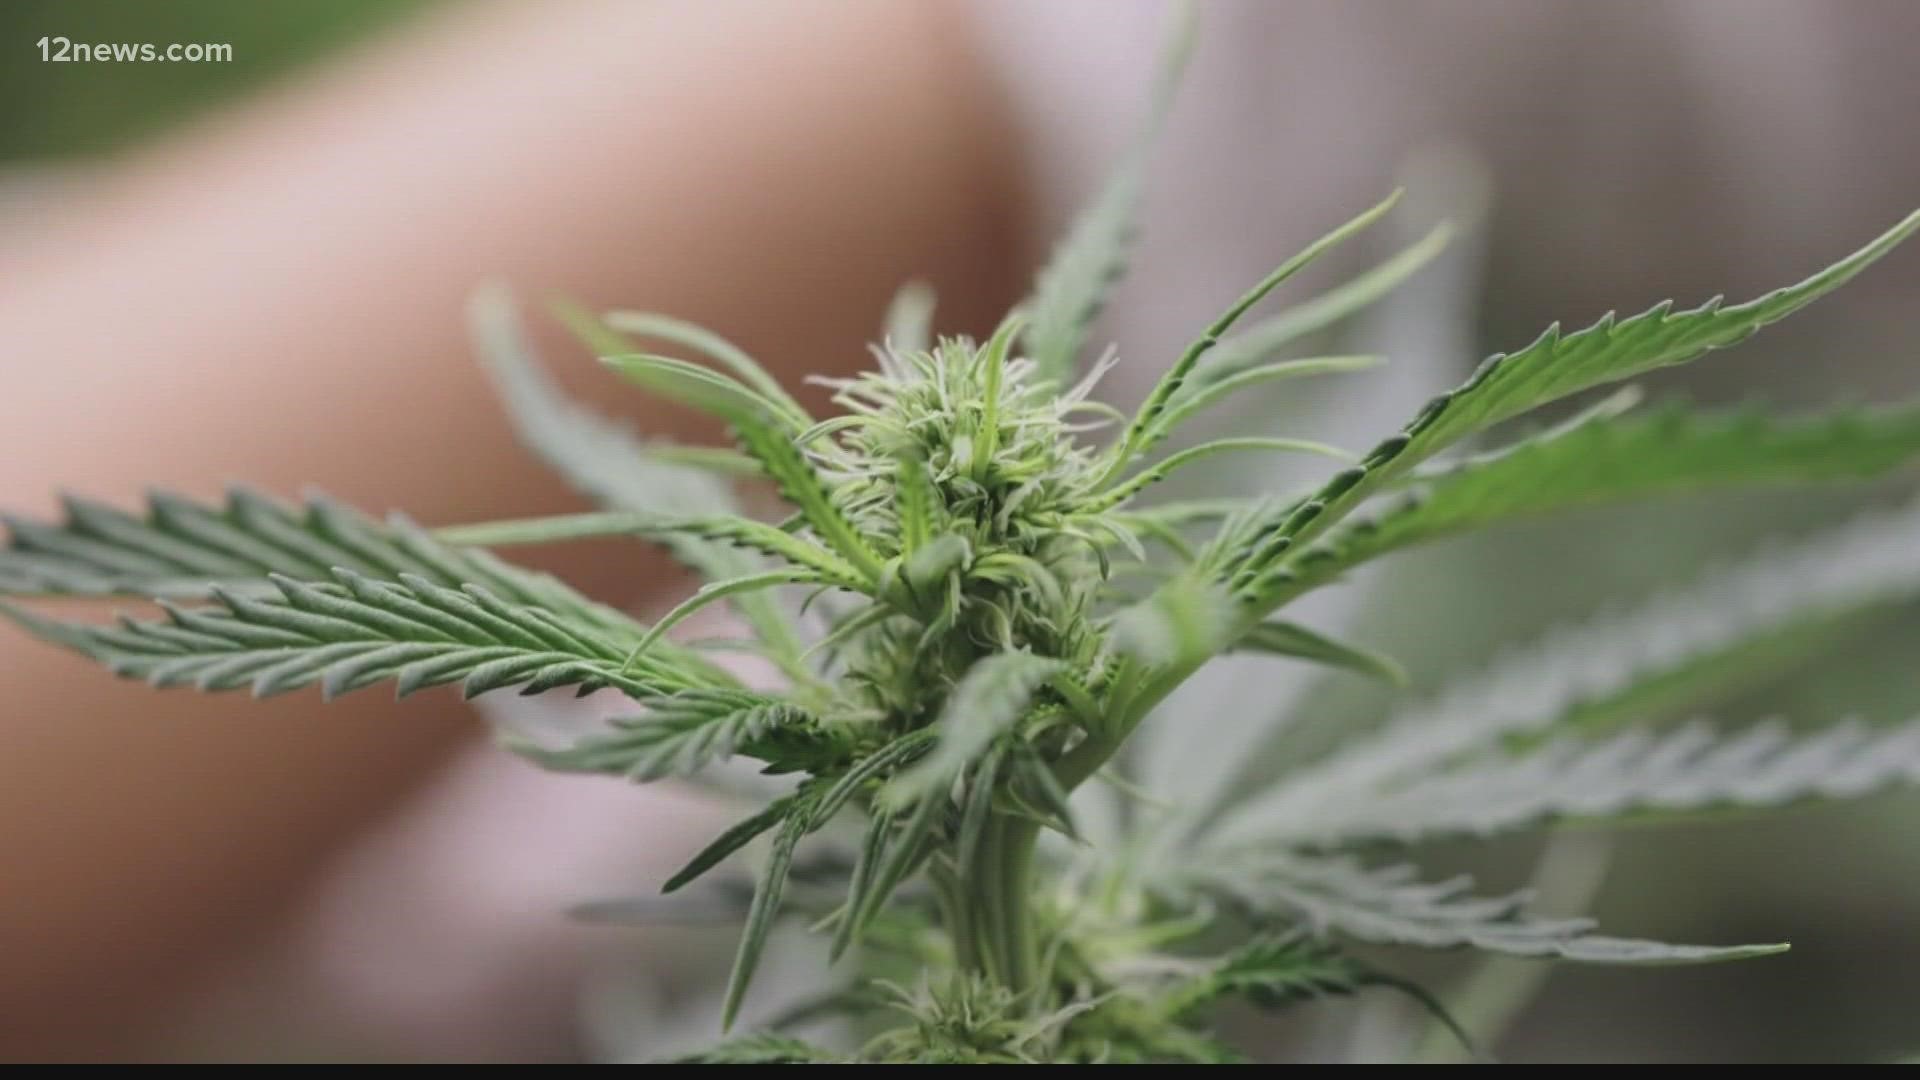 For one Valley woman with Acre 41, a social marijuana advocacy group in Phoenix, the social equity licenses represent an opportunity to bring forth money and jobs.